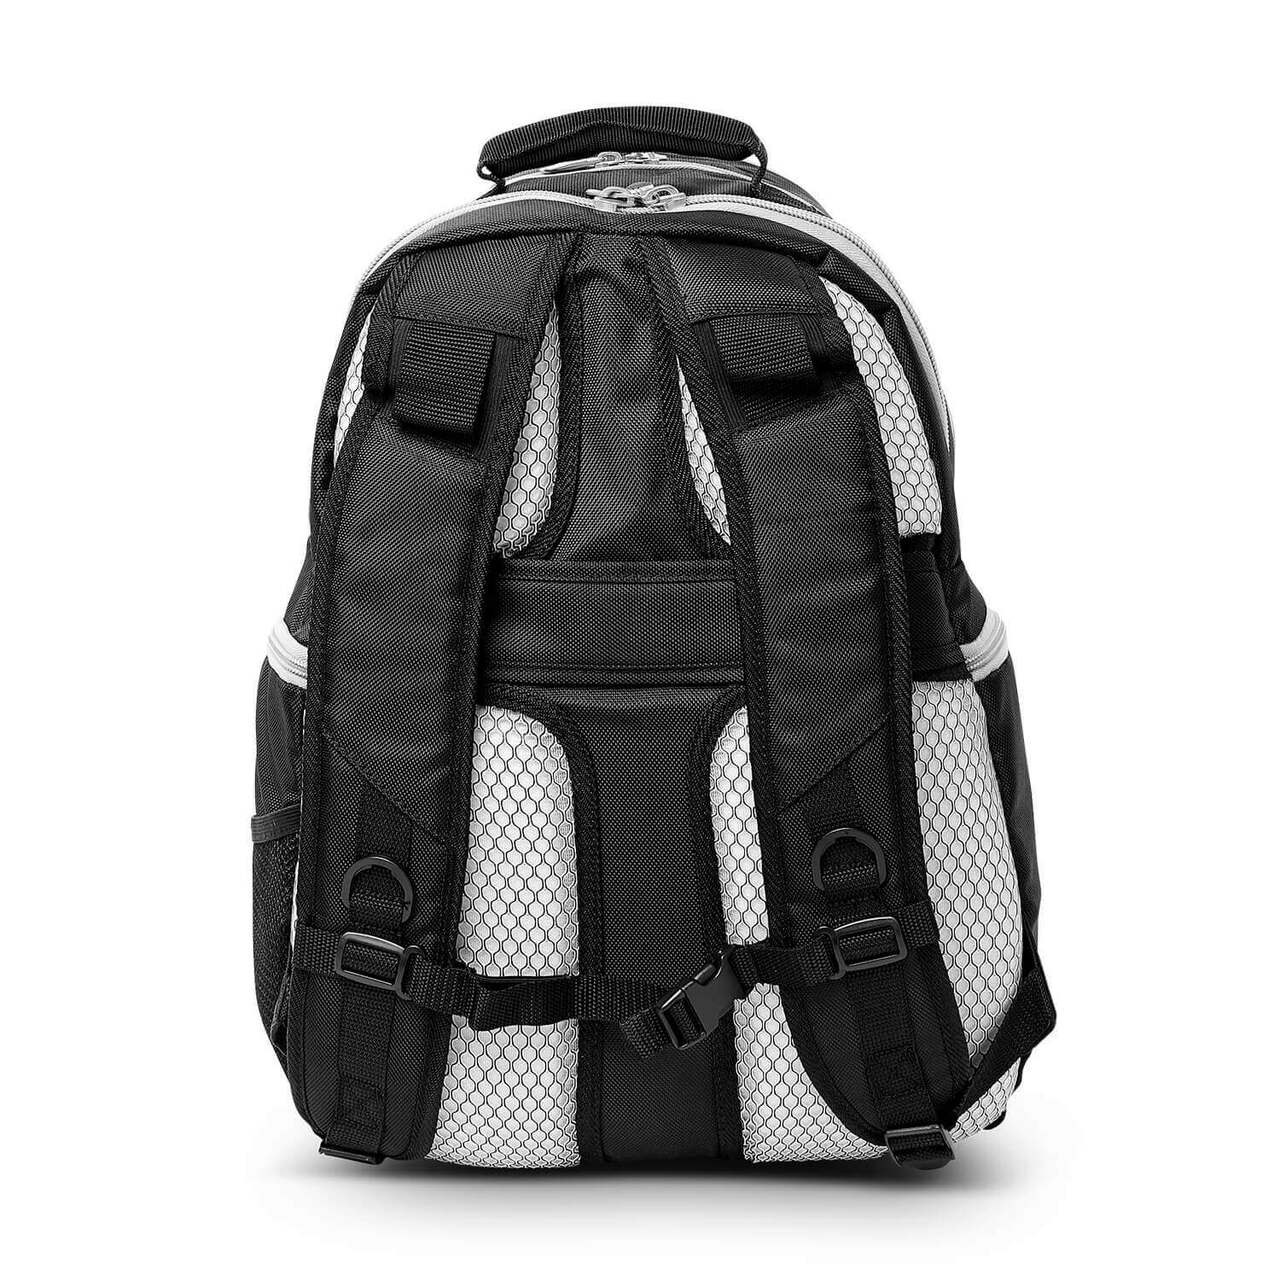 Brooklyn Nets 2 Piece Premium Colored Trim Backpack and Luggage Set